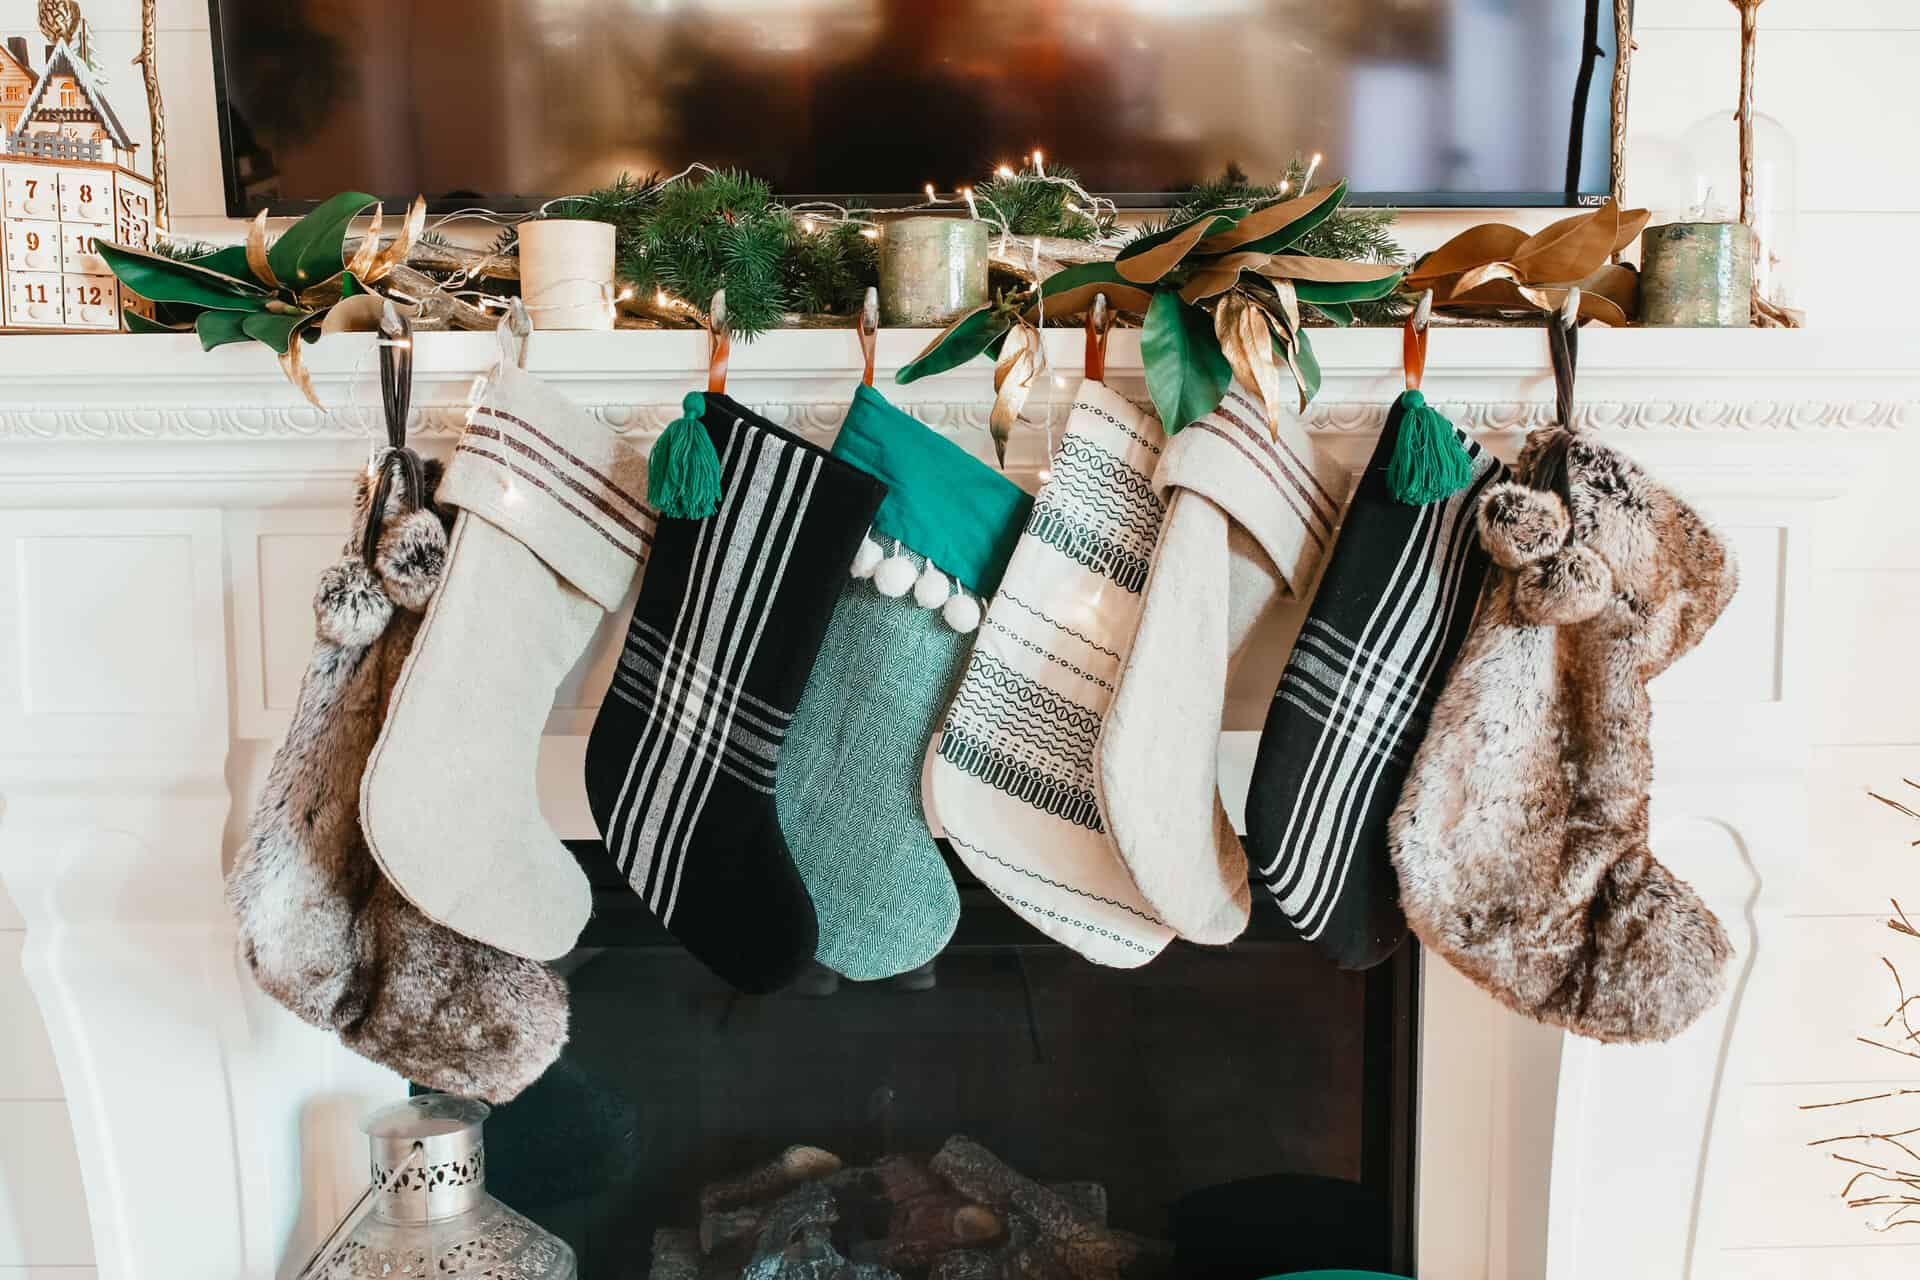 STOCKING BY THE FIREPLACE